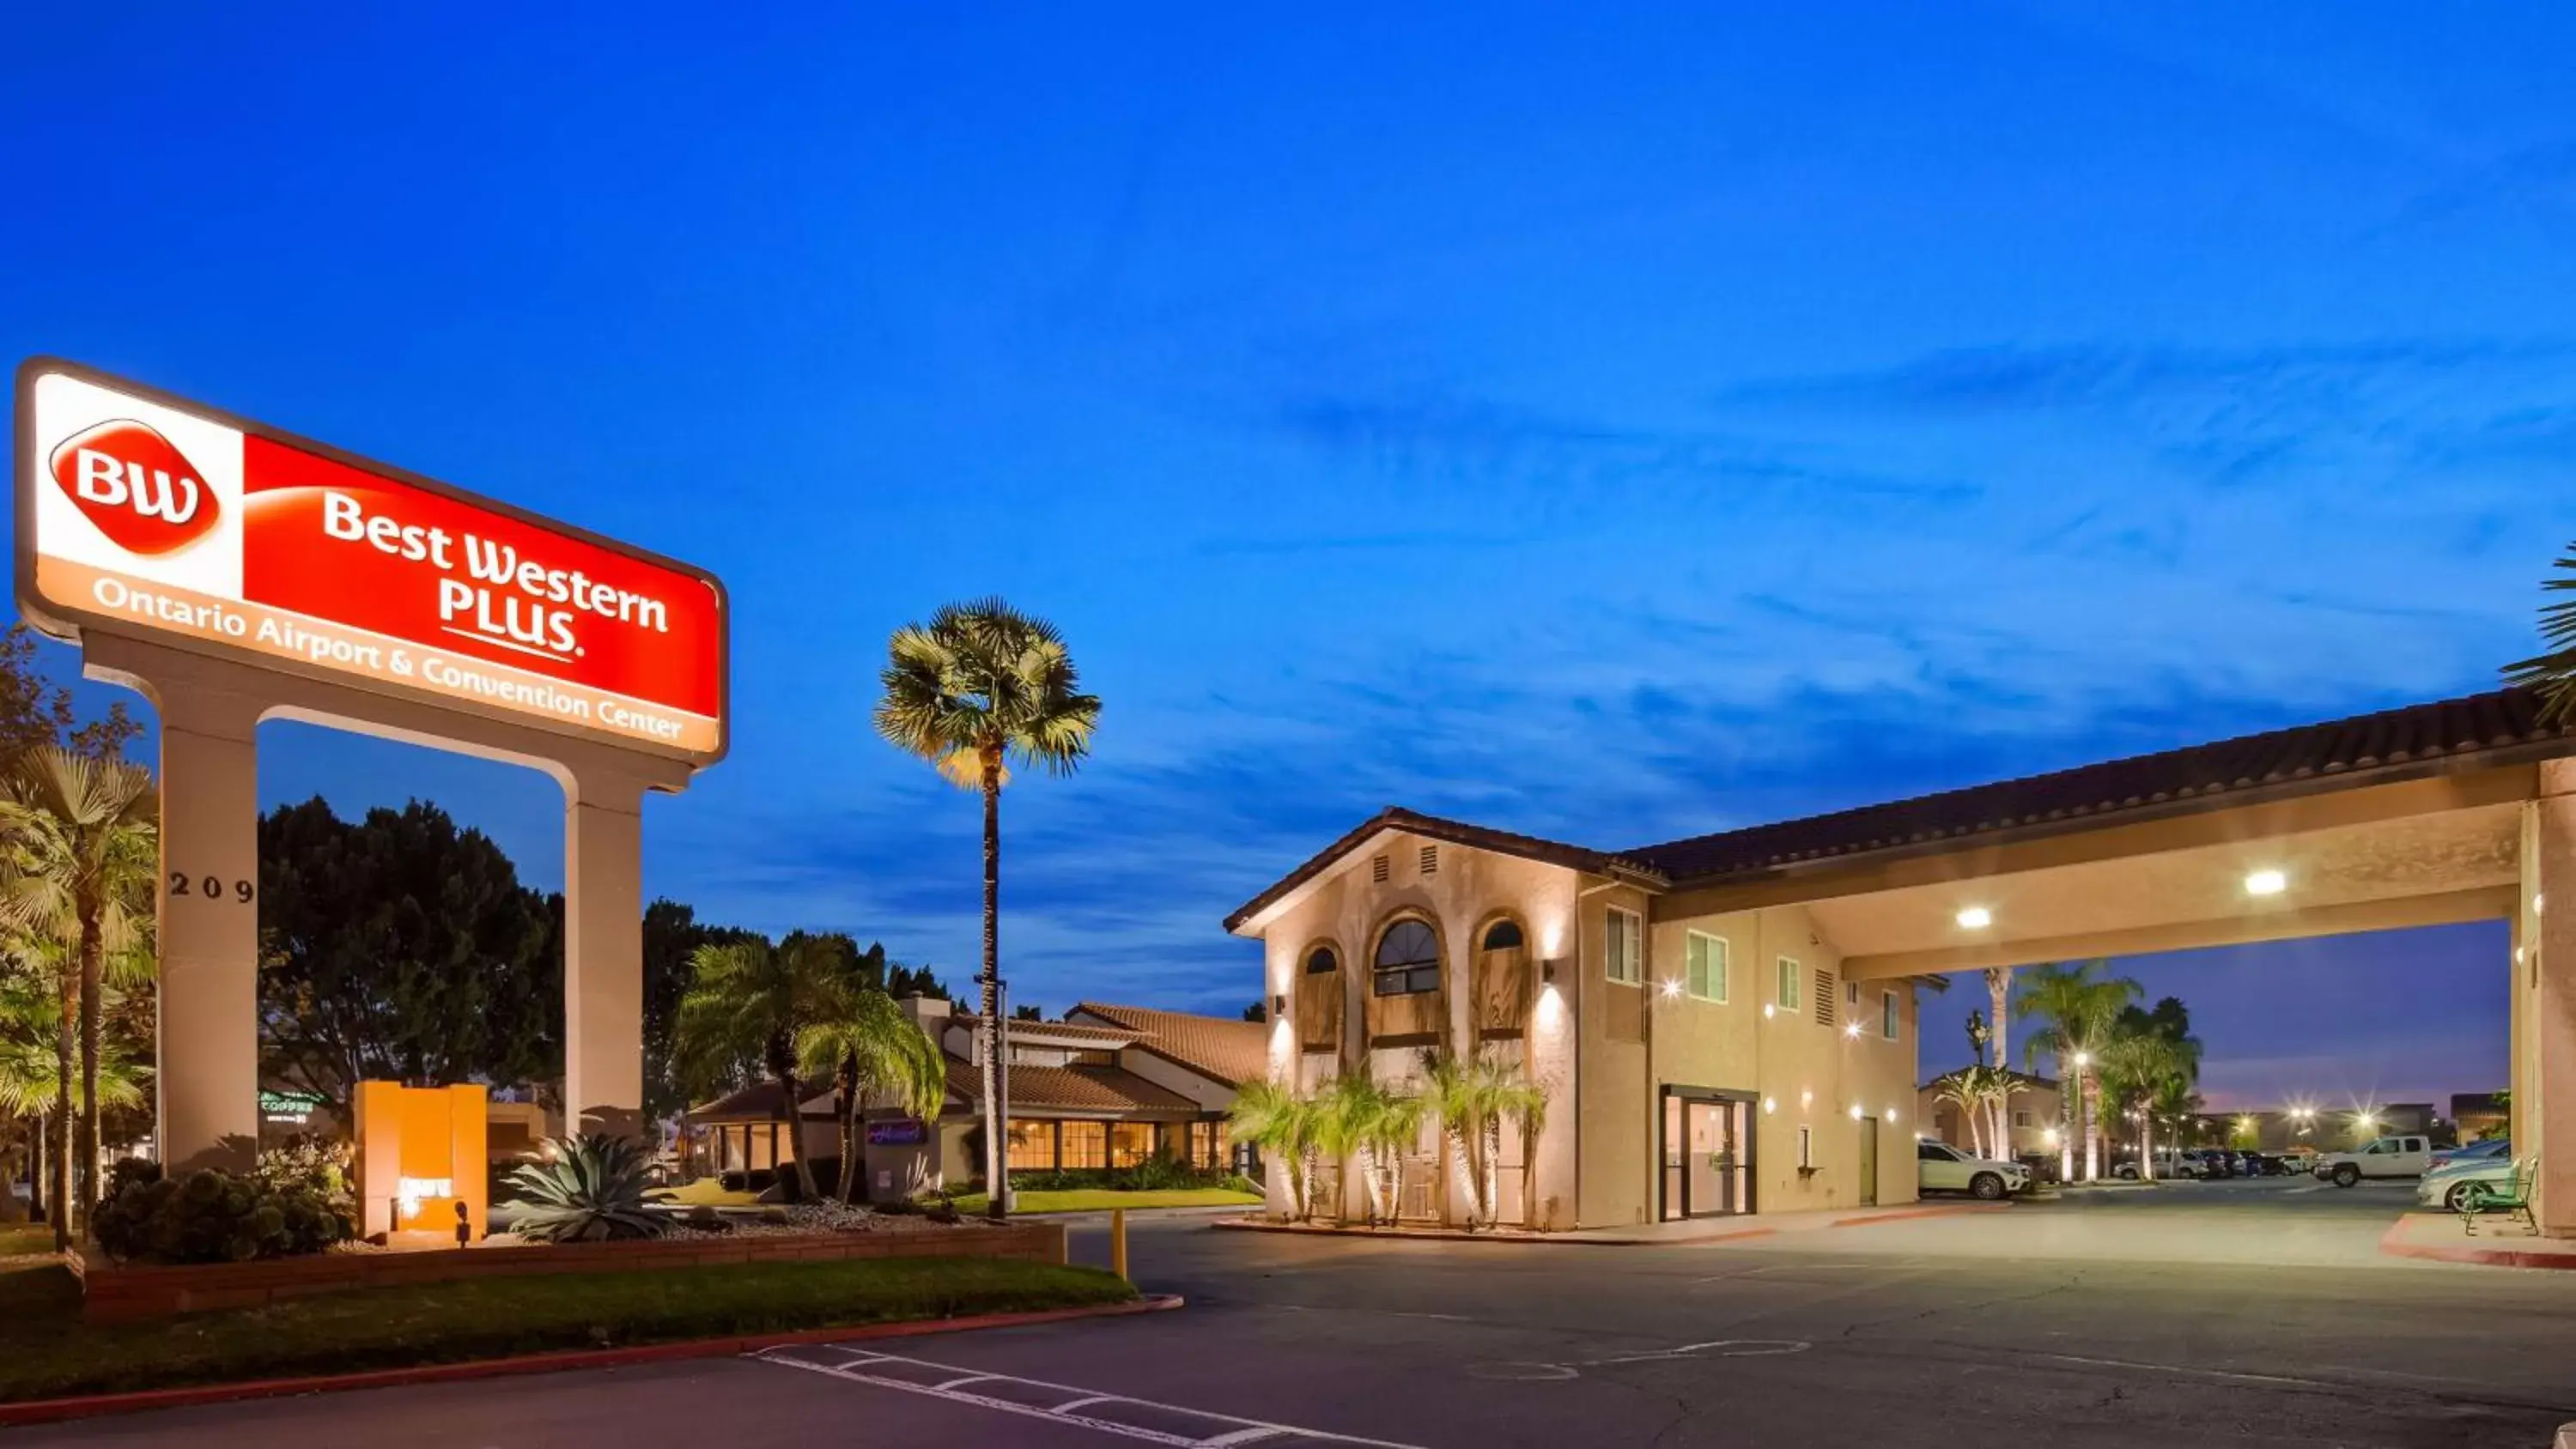 Property Building in Best Western Plus Ontario Airport & Convention Center